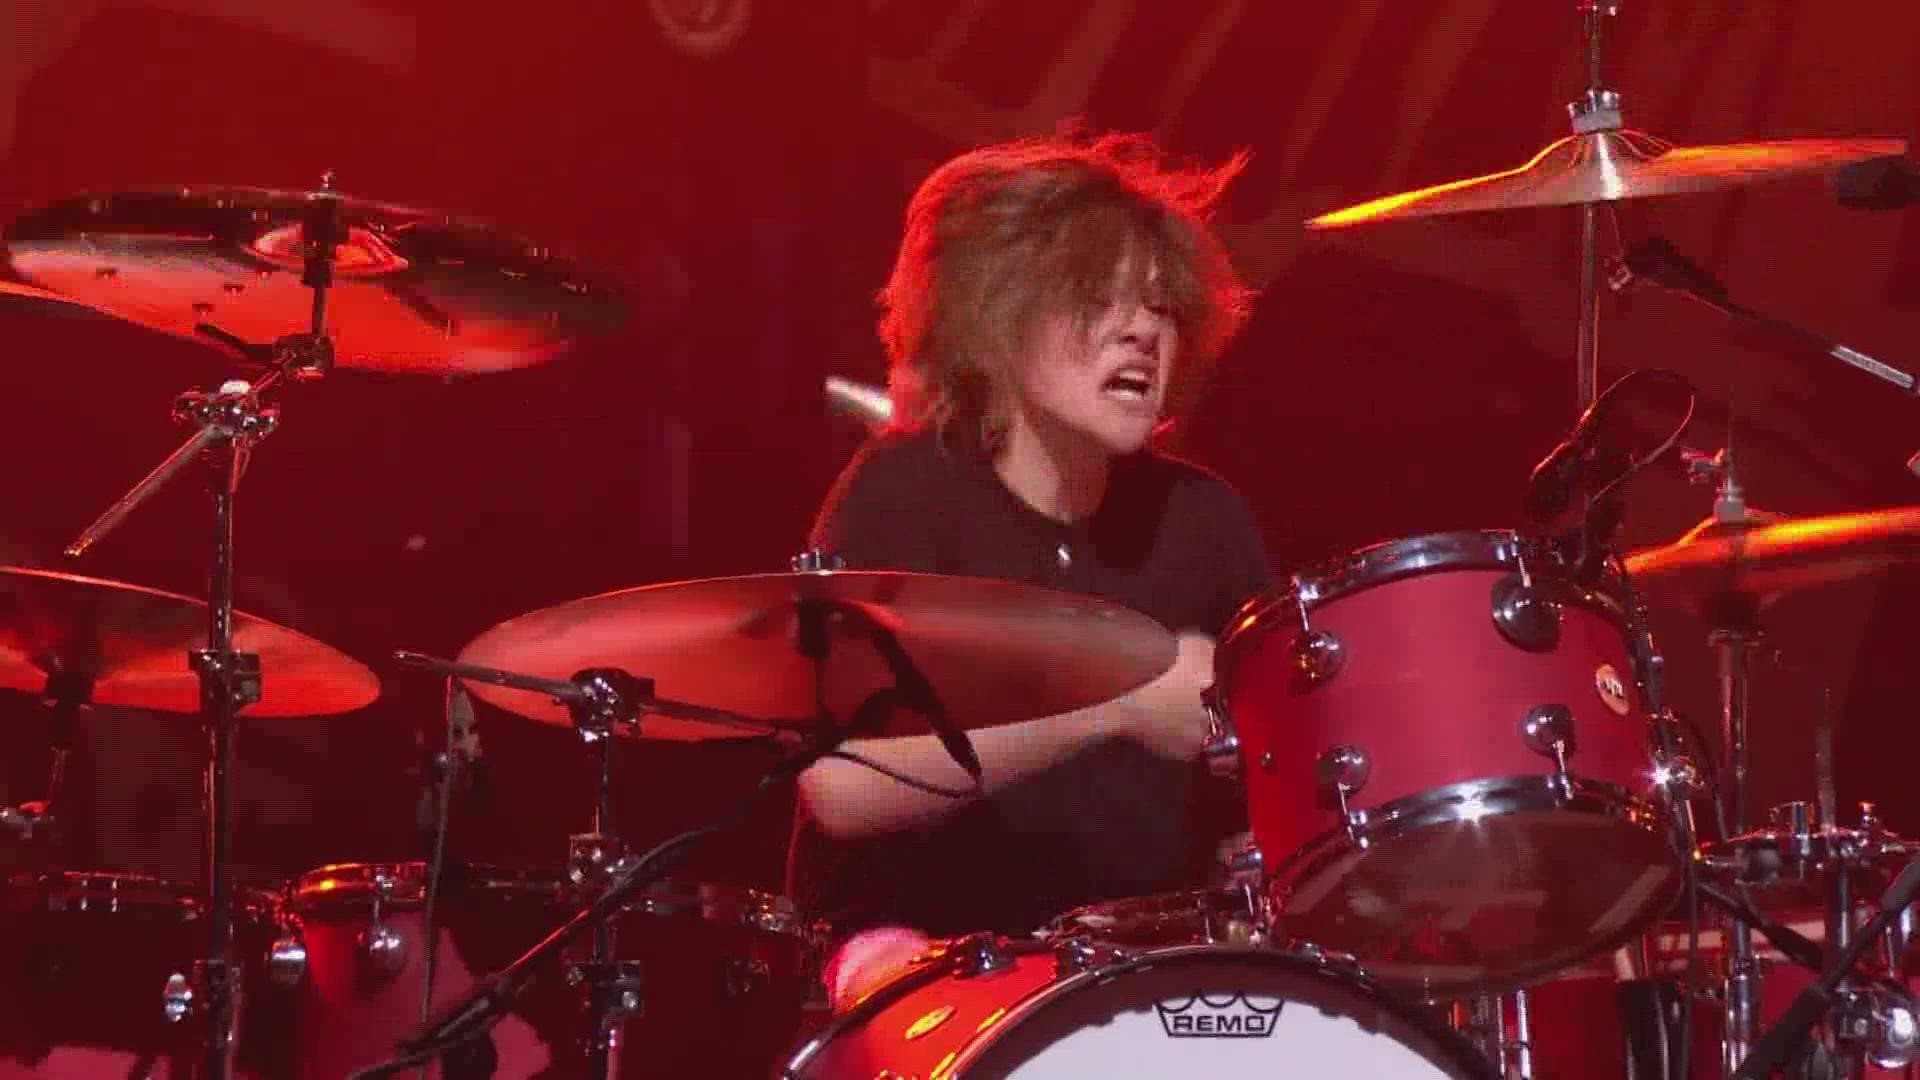 The 16-year-old performed with the band for the first concert they've had since drummer Taylor Hawkins' death in March.